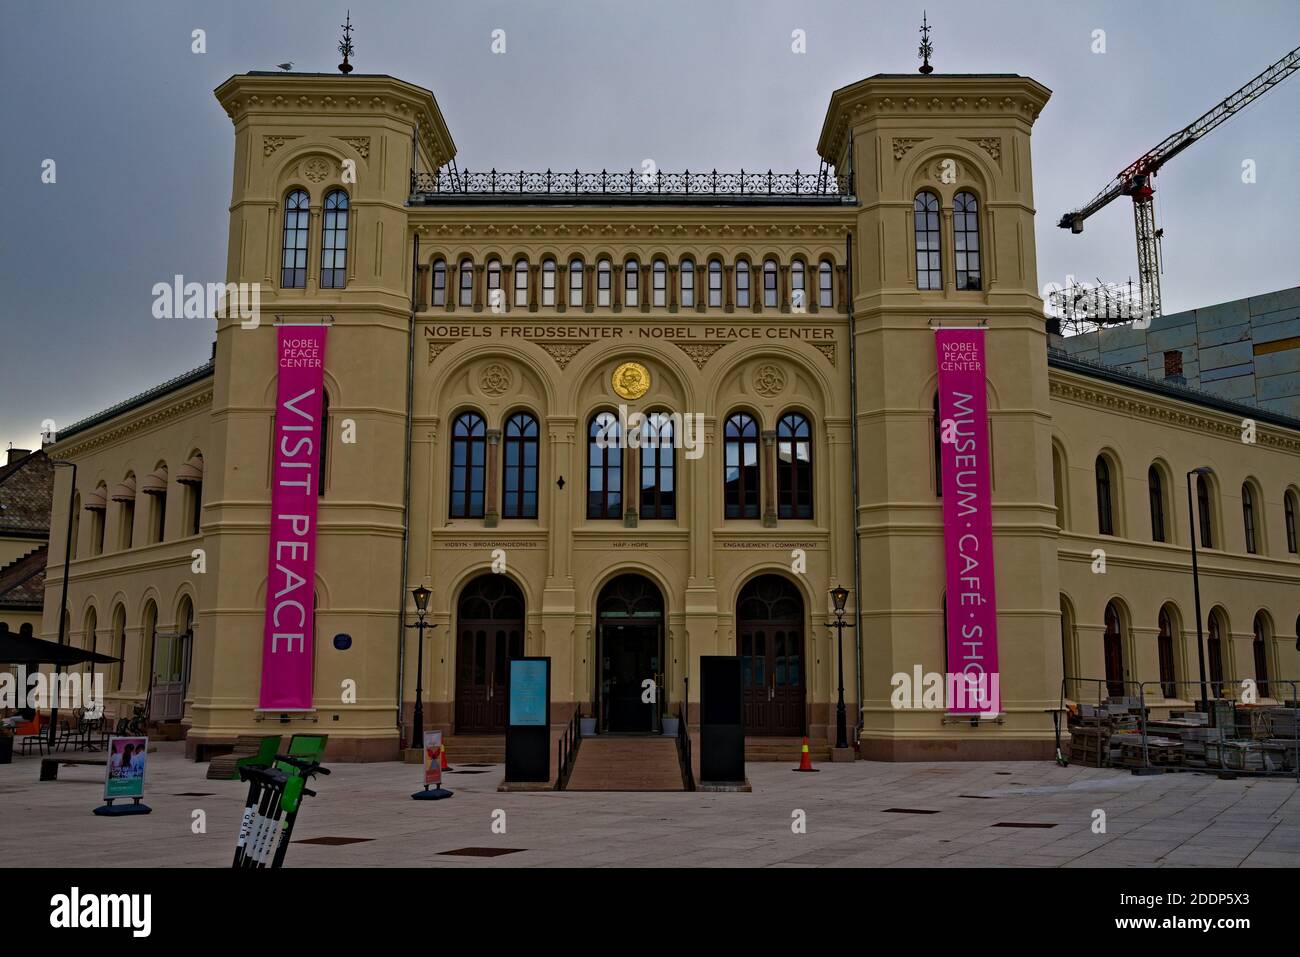 Nobel peace center, place where the peace prize is awarded. High quality photo Stock Photo